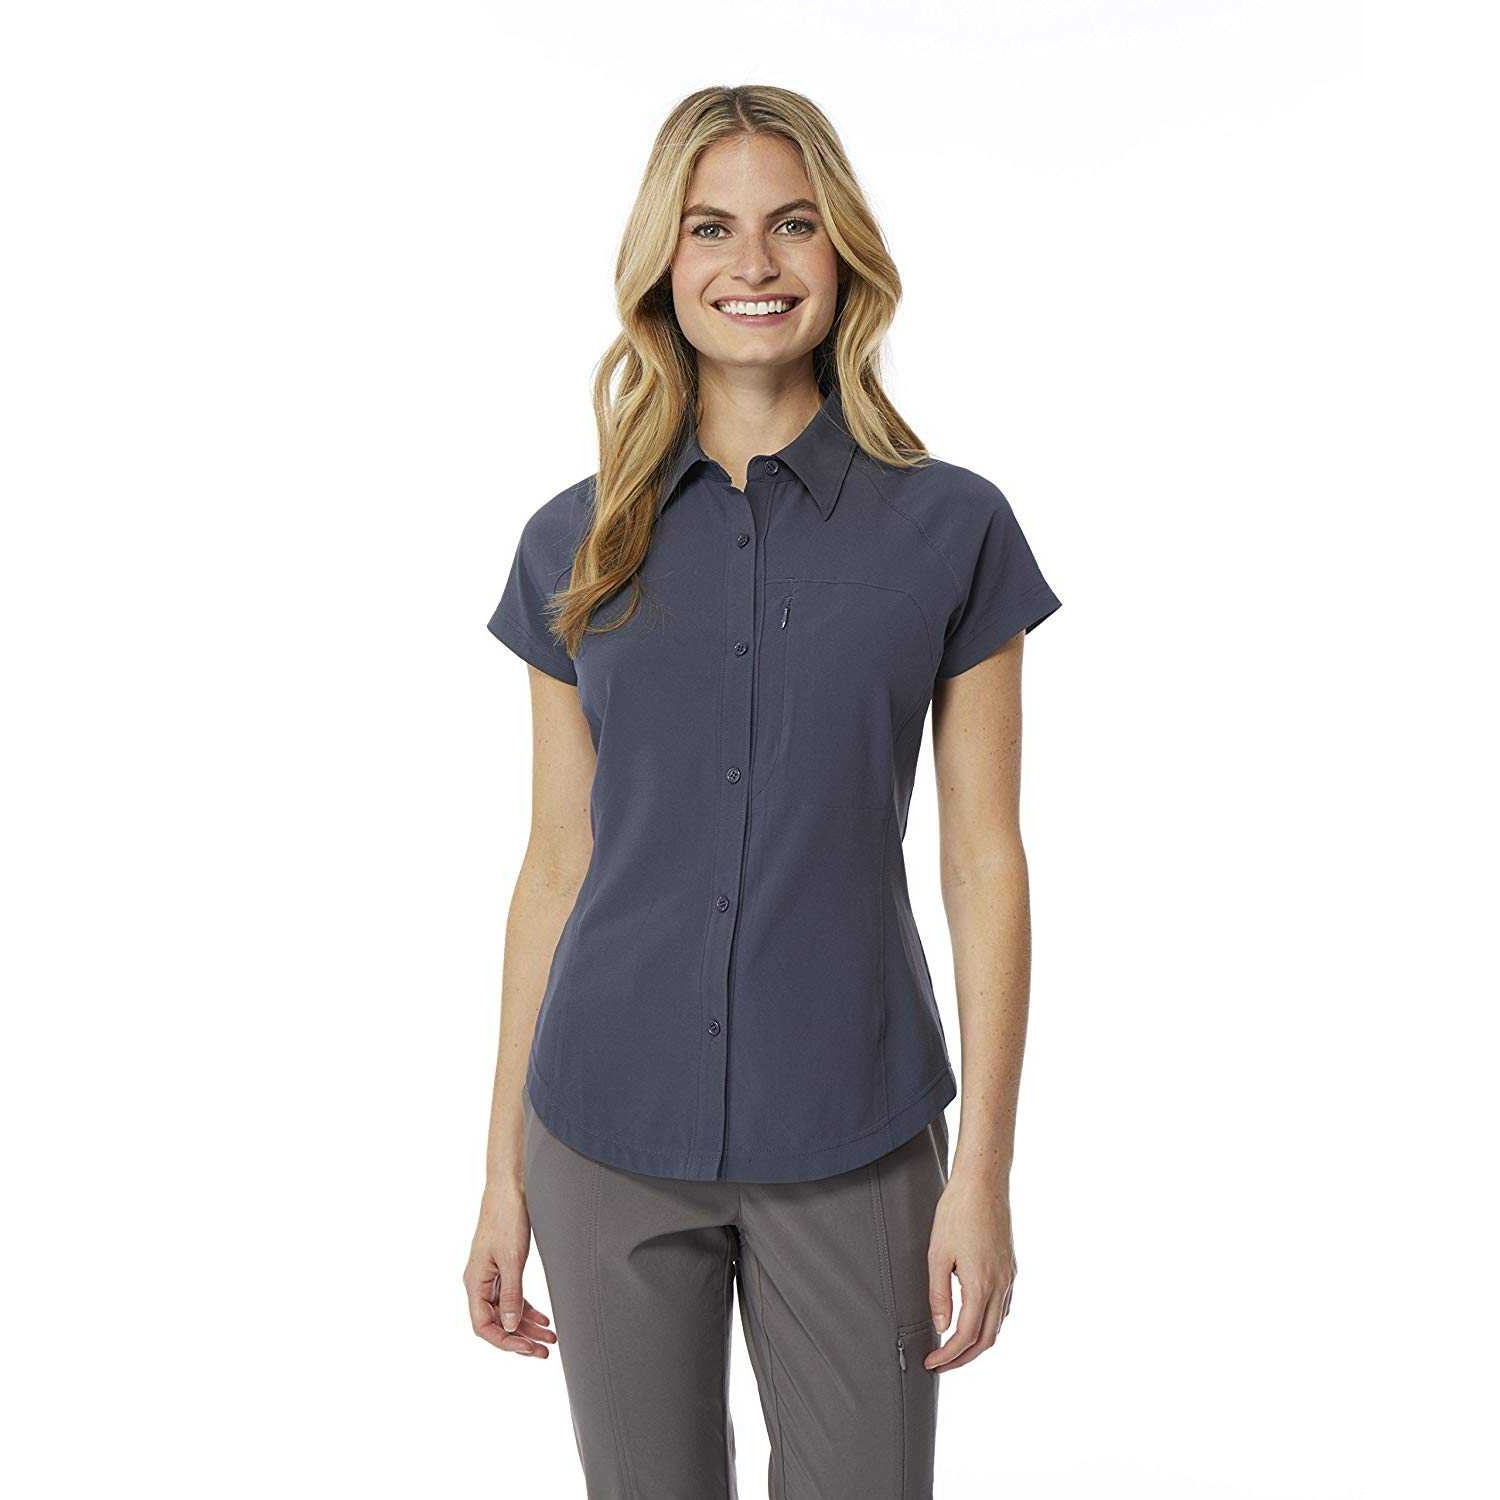 32 Degrees Women’s Outdoor Performance Top Button Down Shirts